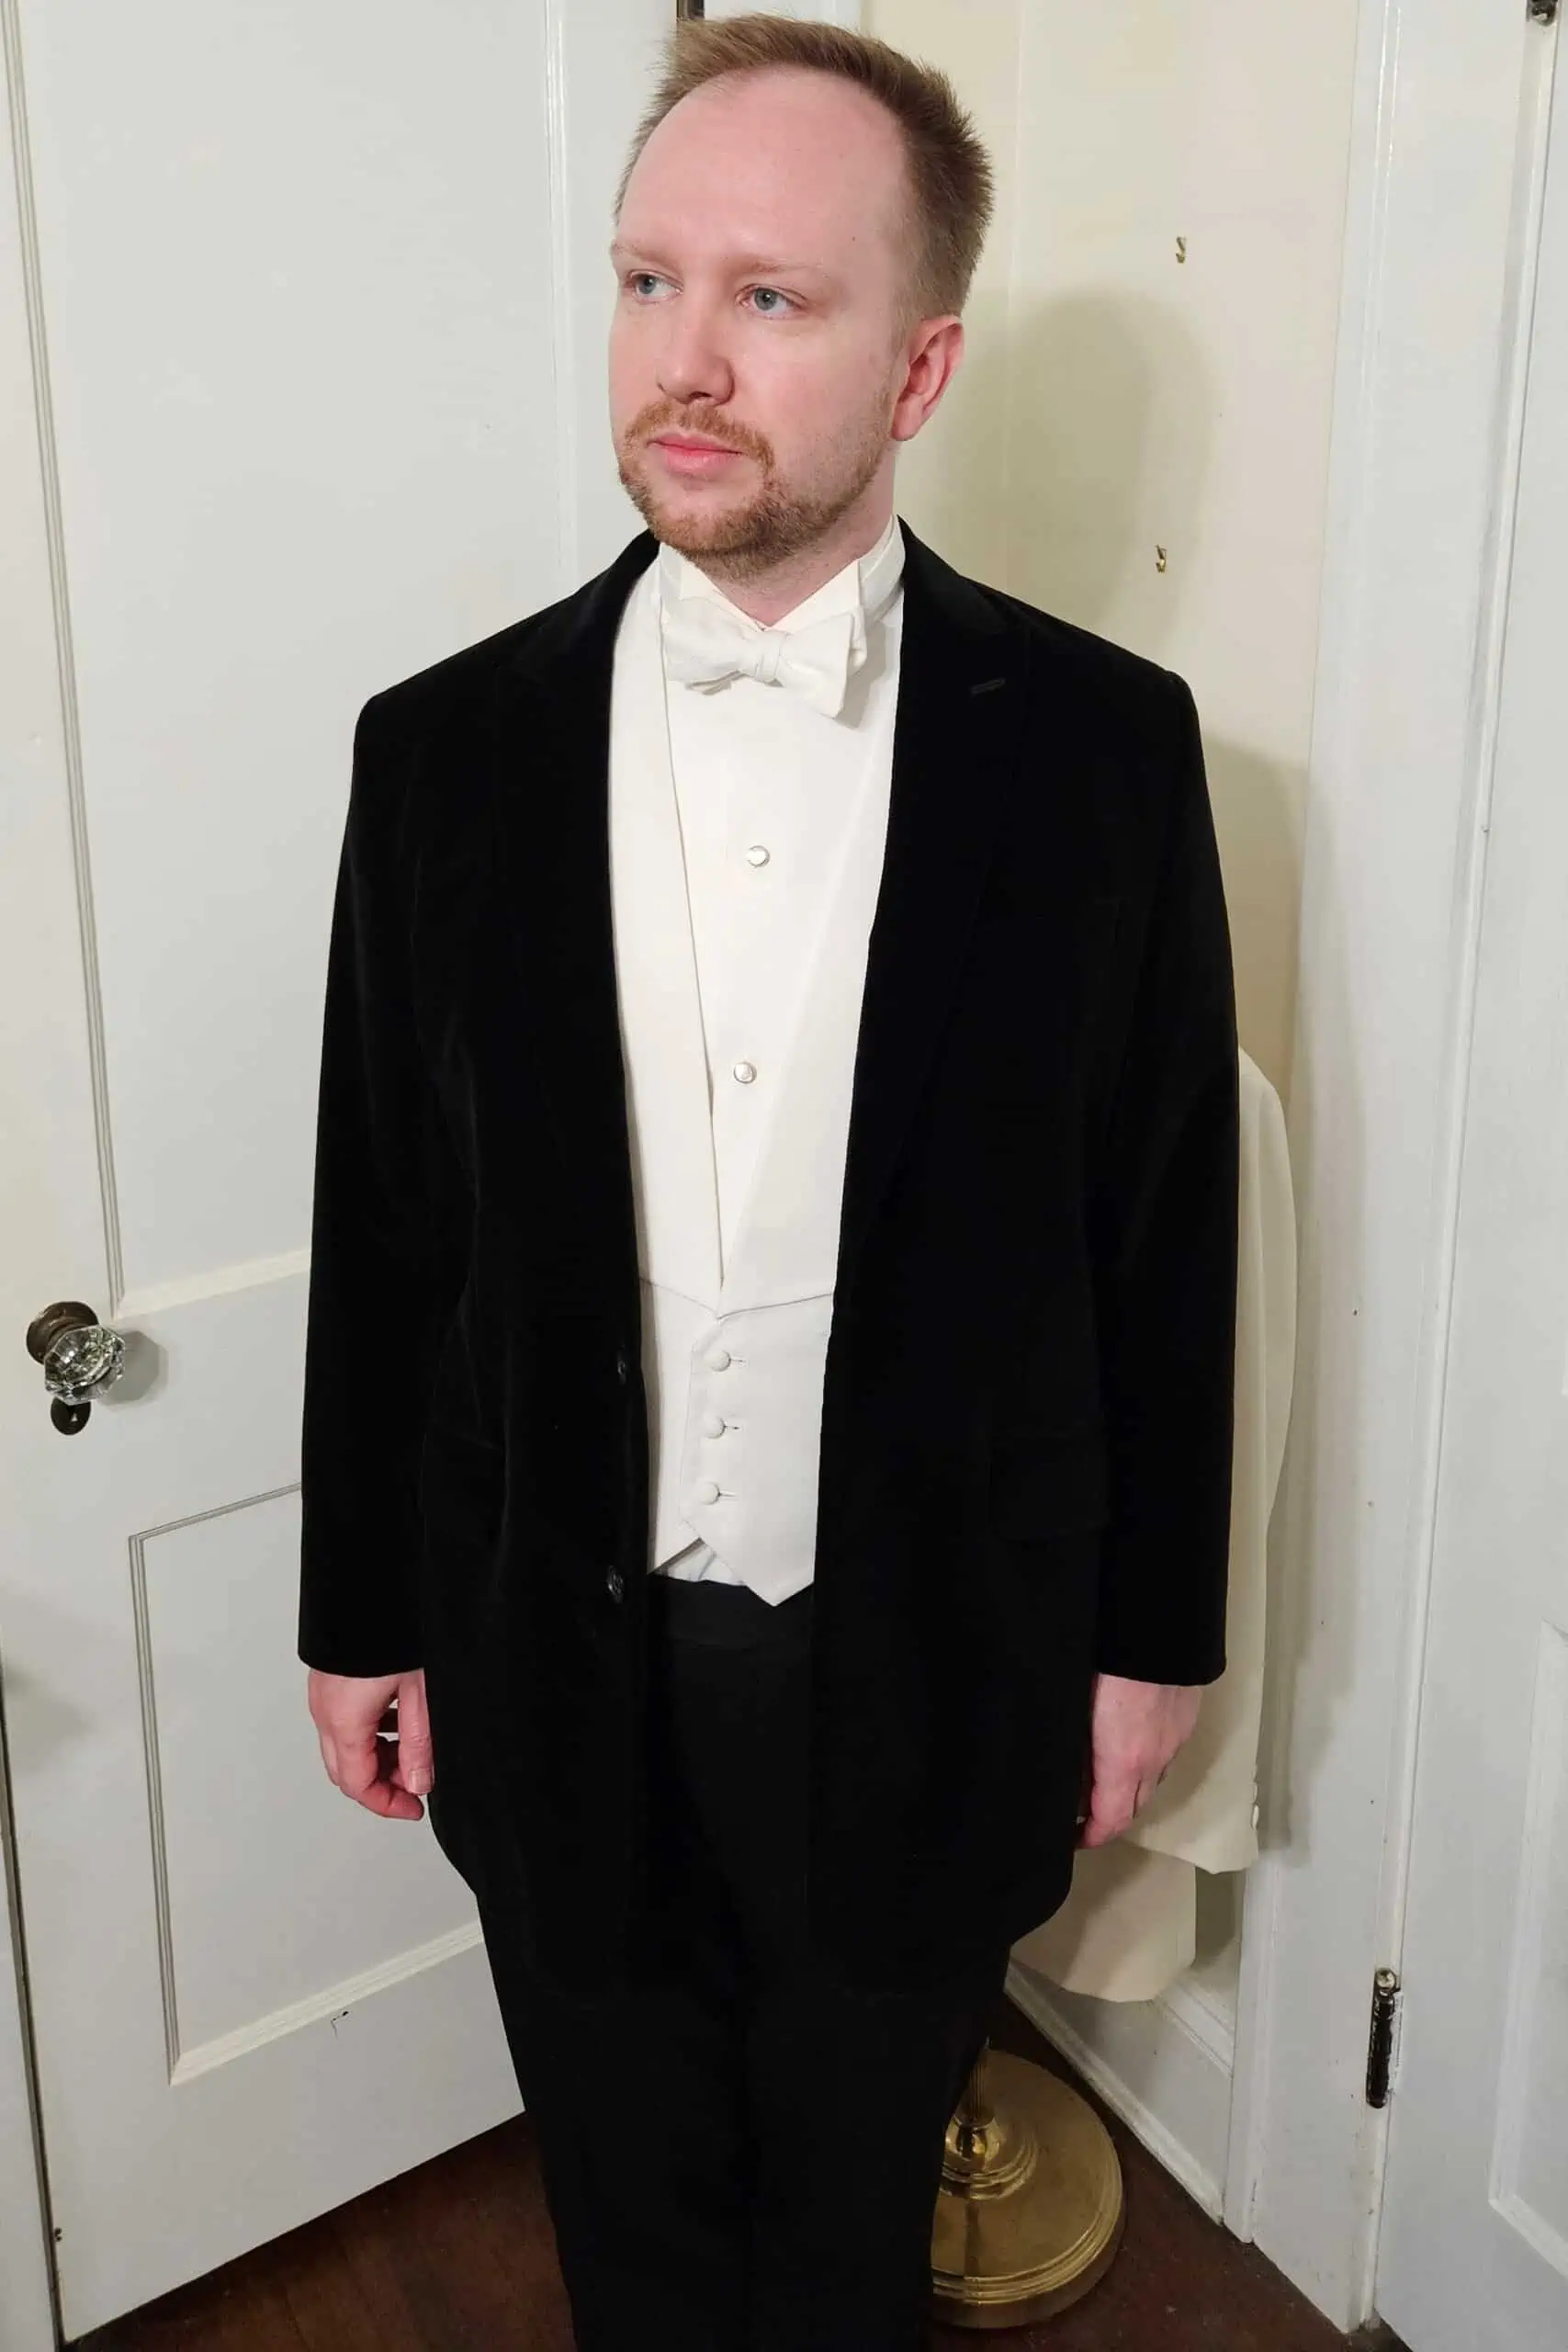 Photo of White Tie worn with a dinner jacket